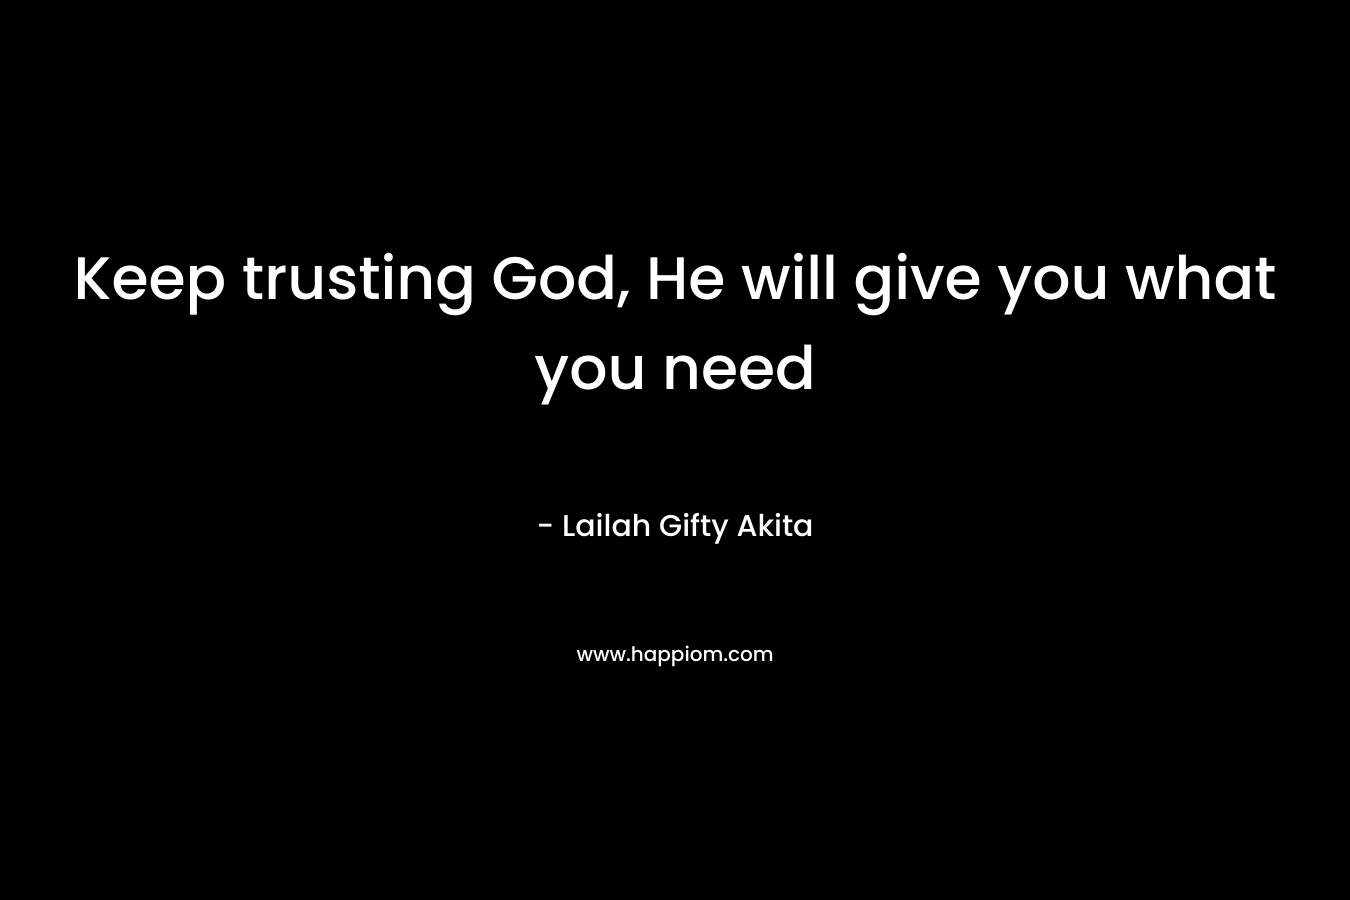 Keep trusting God, He will give you what you need